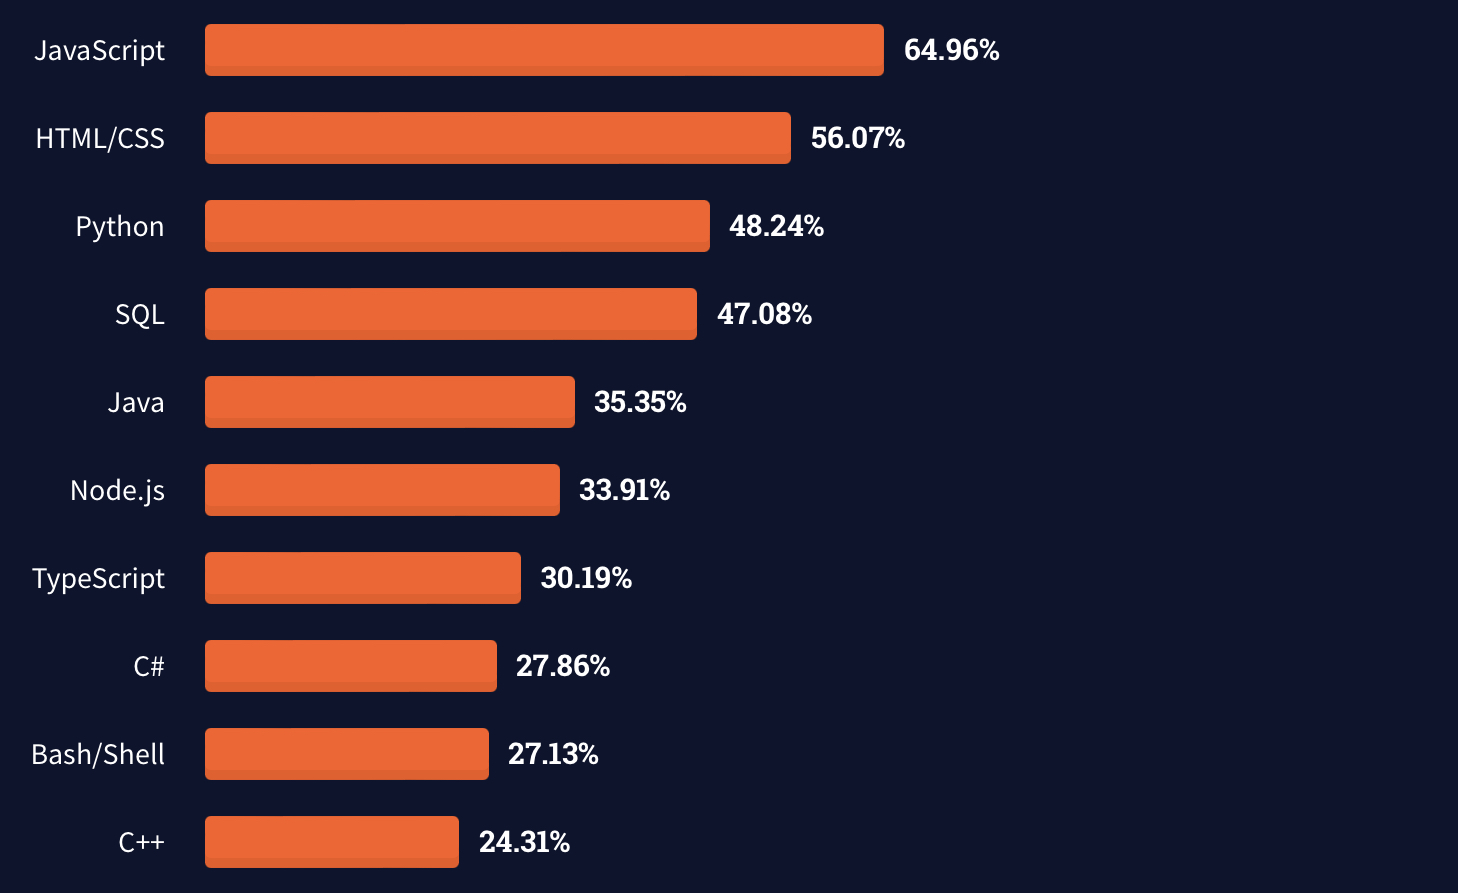 An orange bar chart on a dark background showing TypeScript ranking seventh behind the likes of JavaScript, HTML/CSS, Python, SWL, Java, and Node.